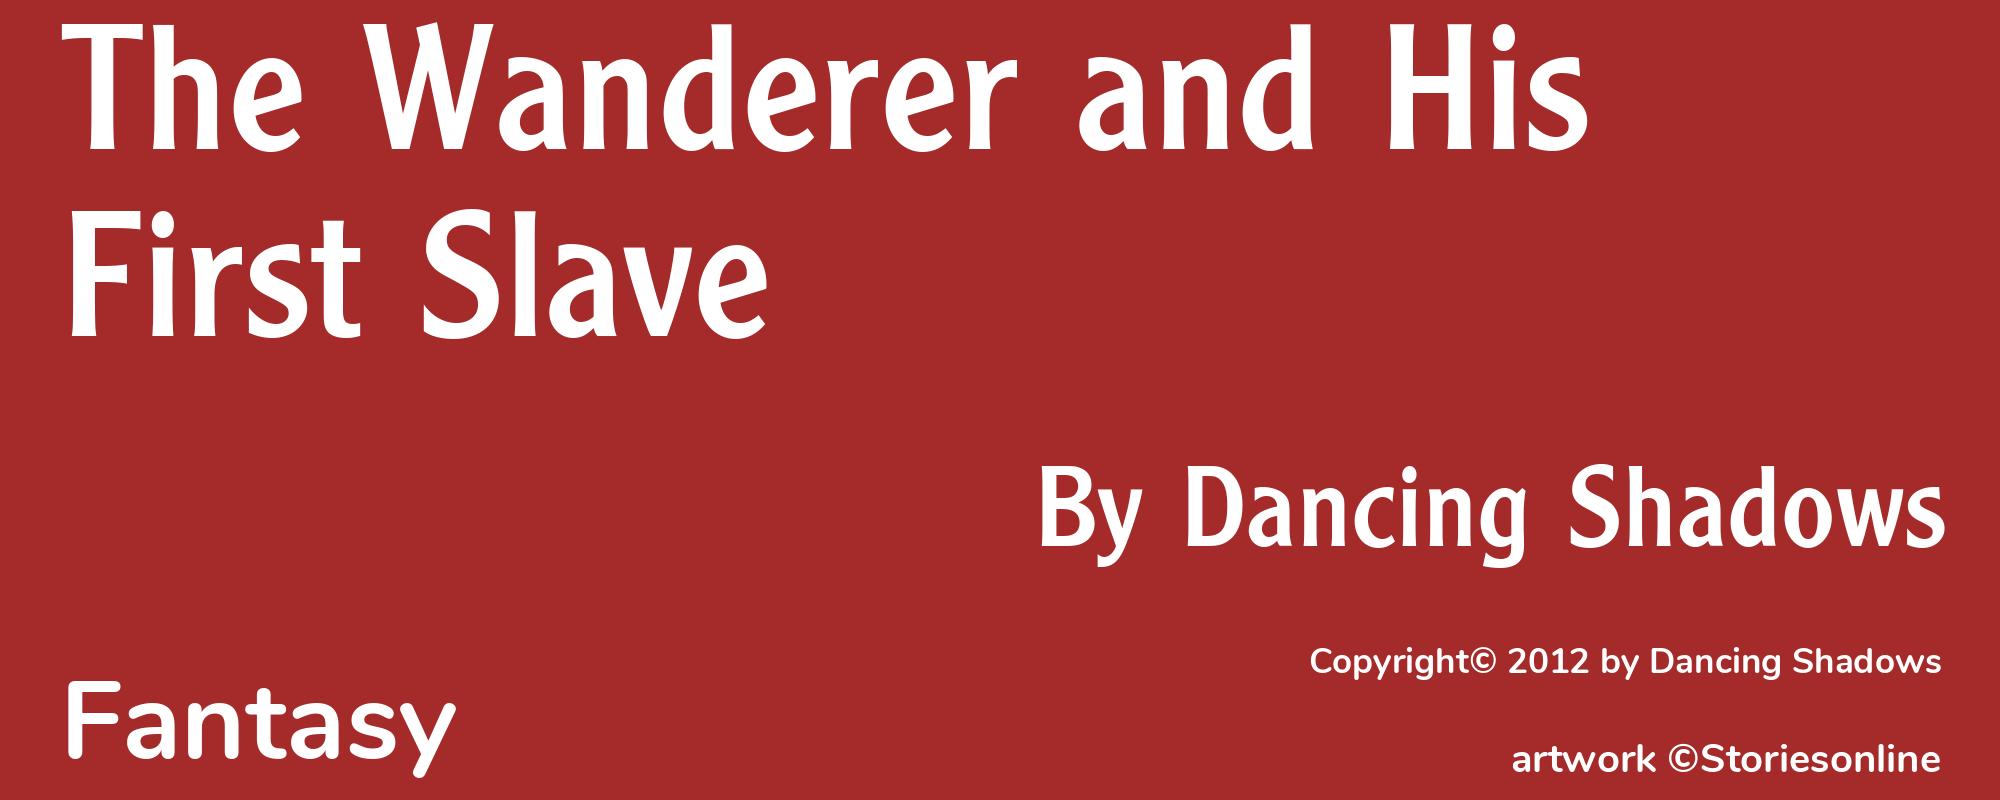 The Wanderer and His First Slave - Cover